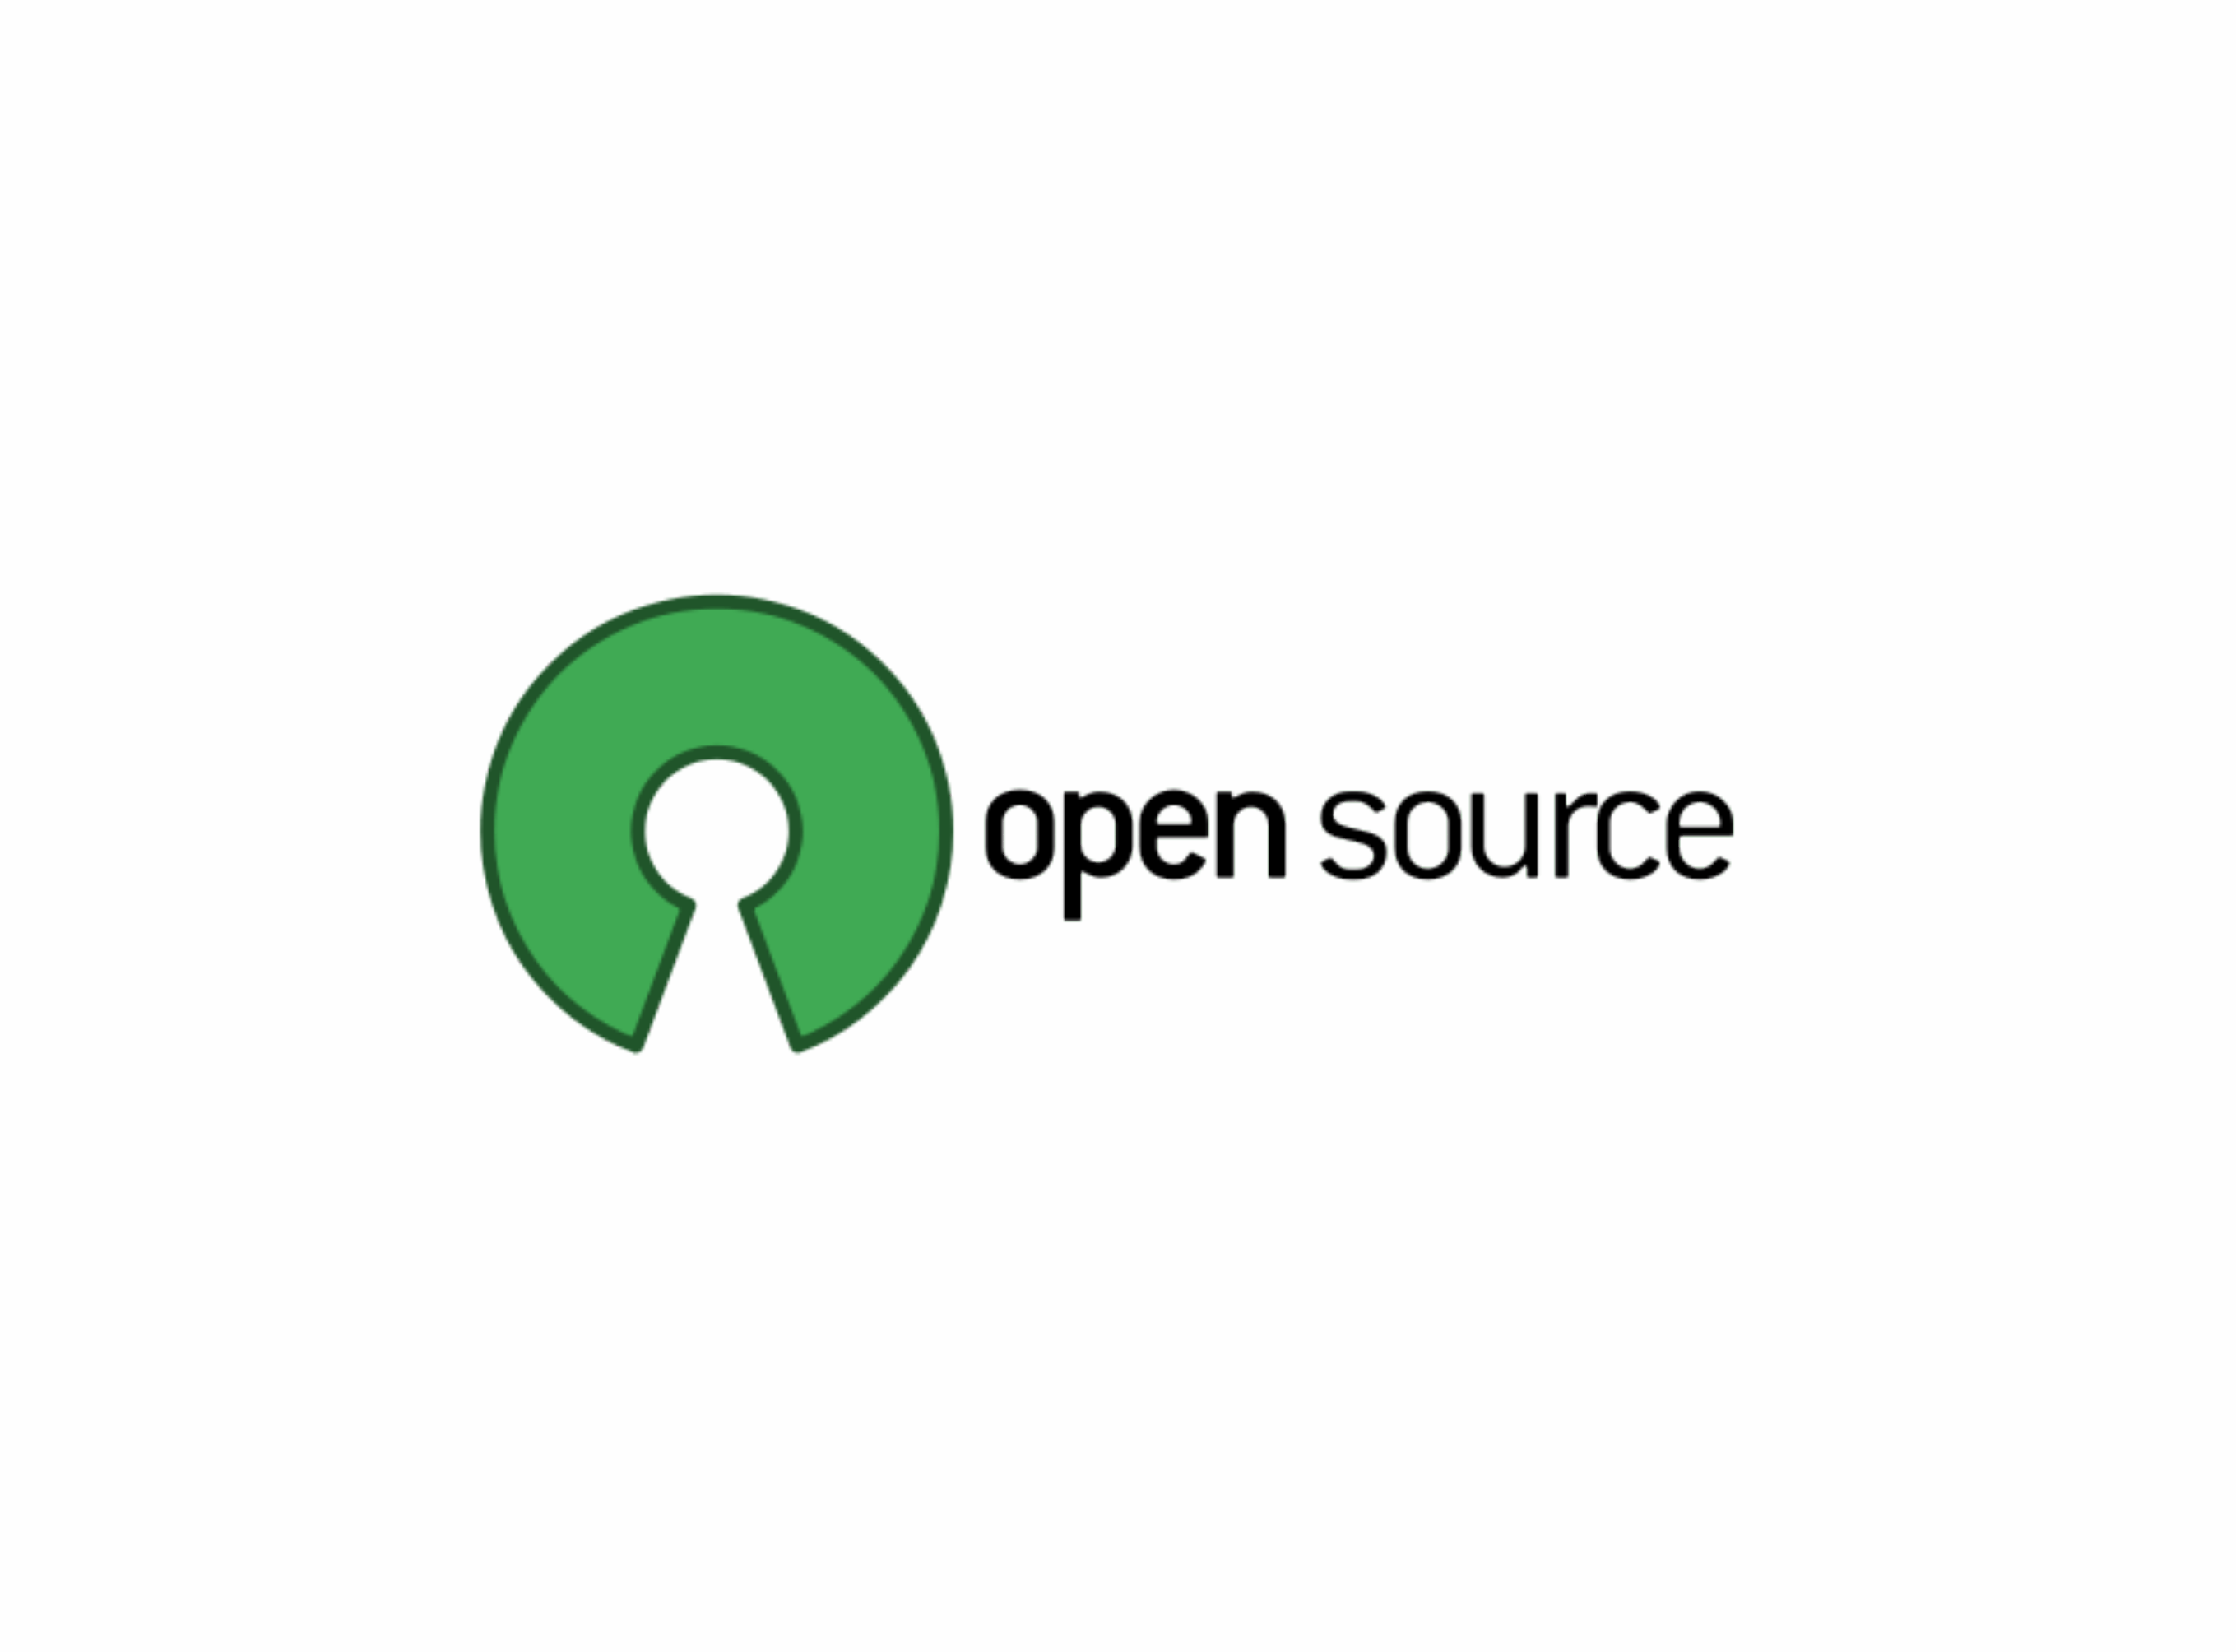 open-source-logo-1.png